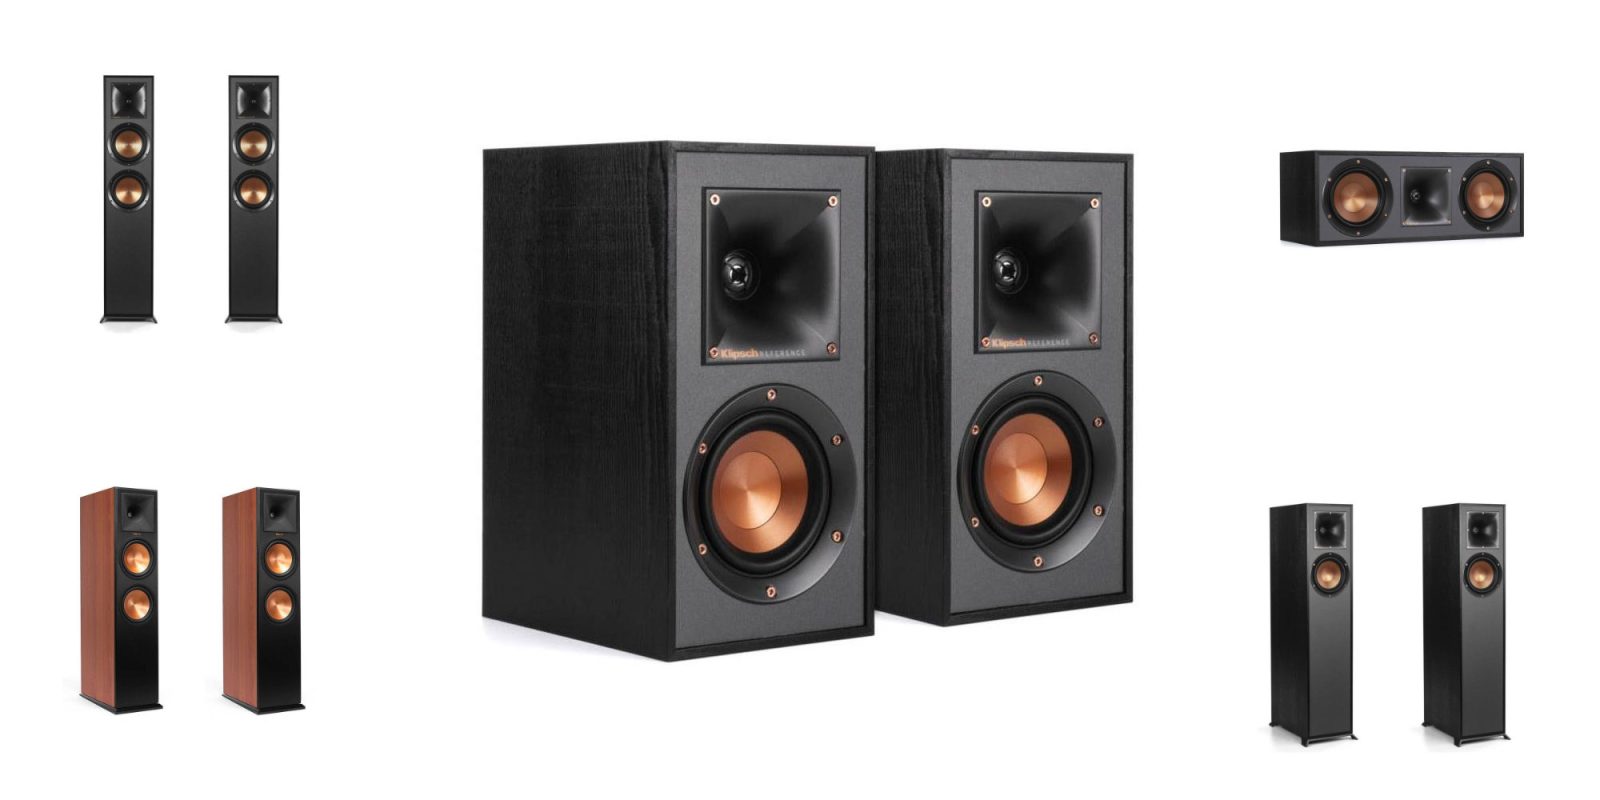 Stock up on Klipsch Home Theater Speakers starting at $110 shipped (up